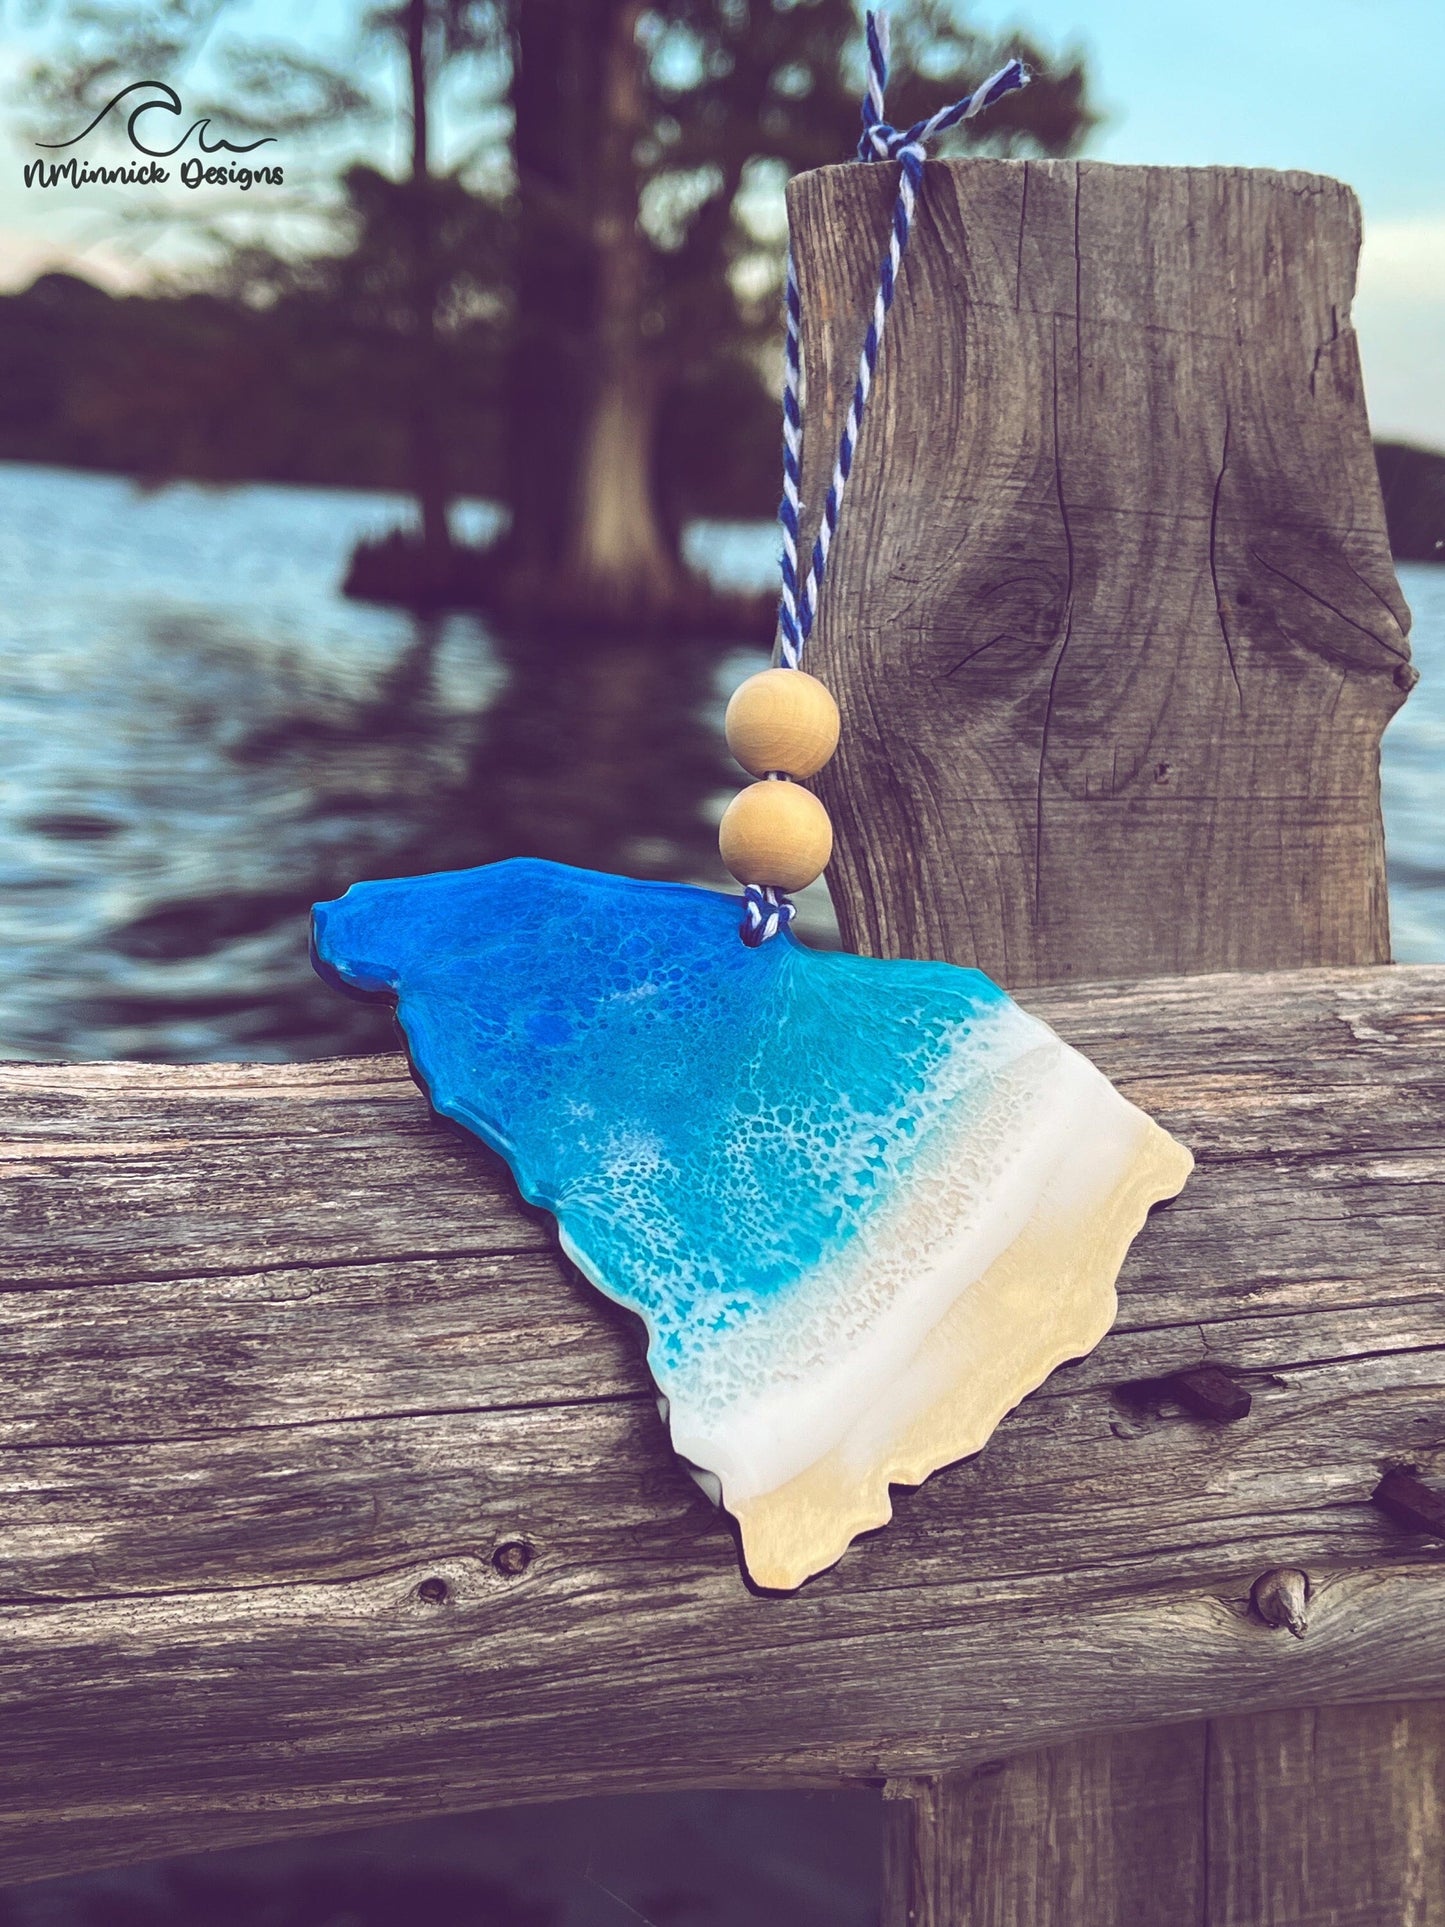 South Carolina-shaped wooden Christmas ornament covered in blue and teal colored ocean resin art resembling the waves along South Carolina&#39;s Atlantic Coast. Finished with blue and white baker&#39;s twine and two wooden beads.